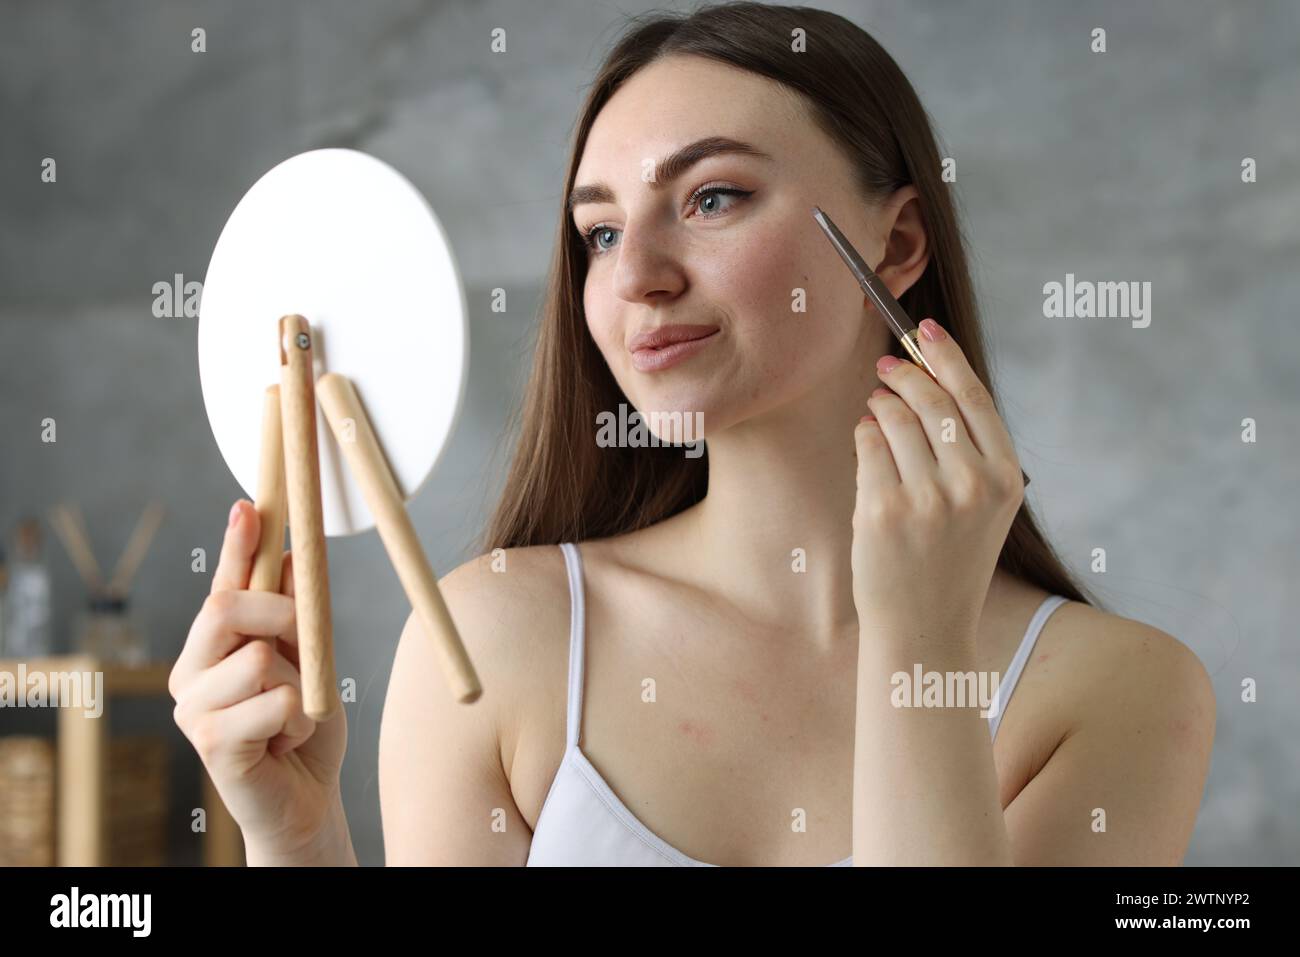 Beautiful woman drawing freckles with pen in front of little mirror indoors Stock Photo